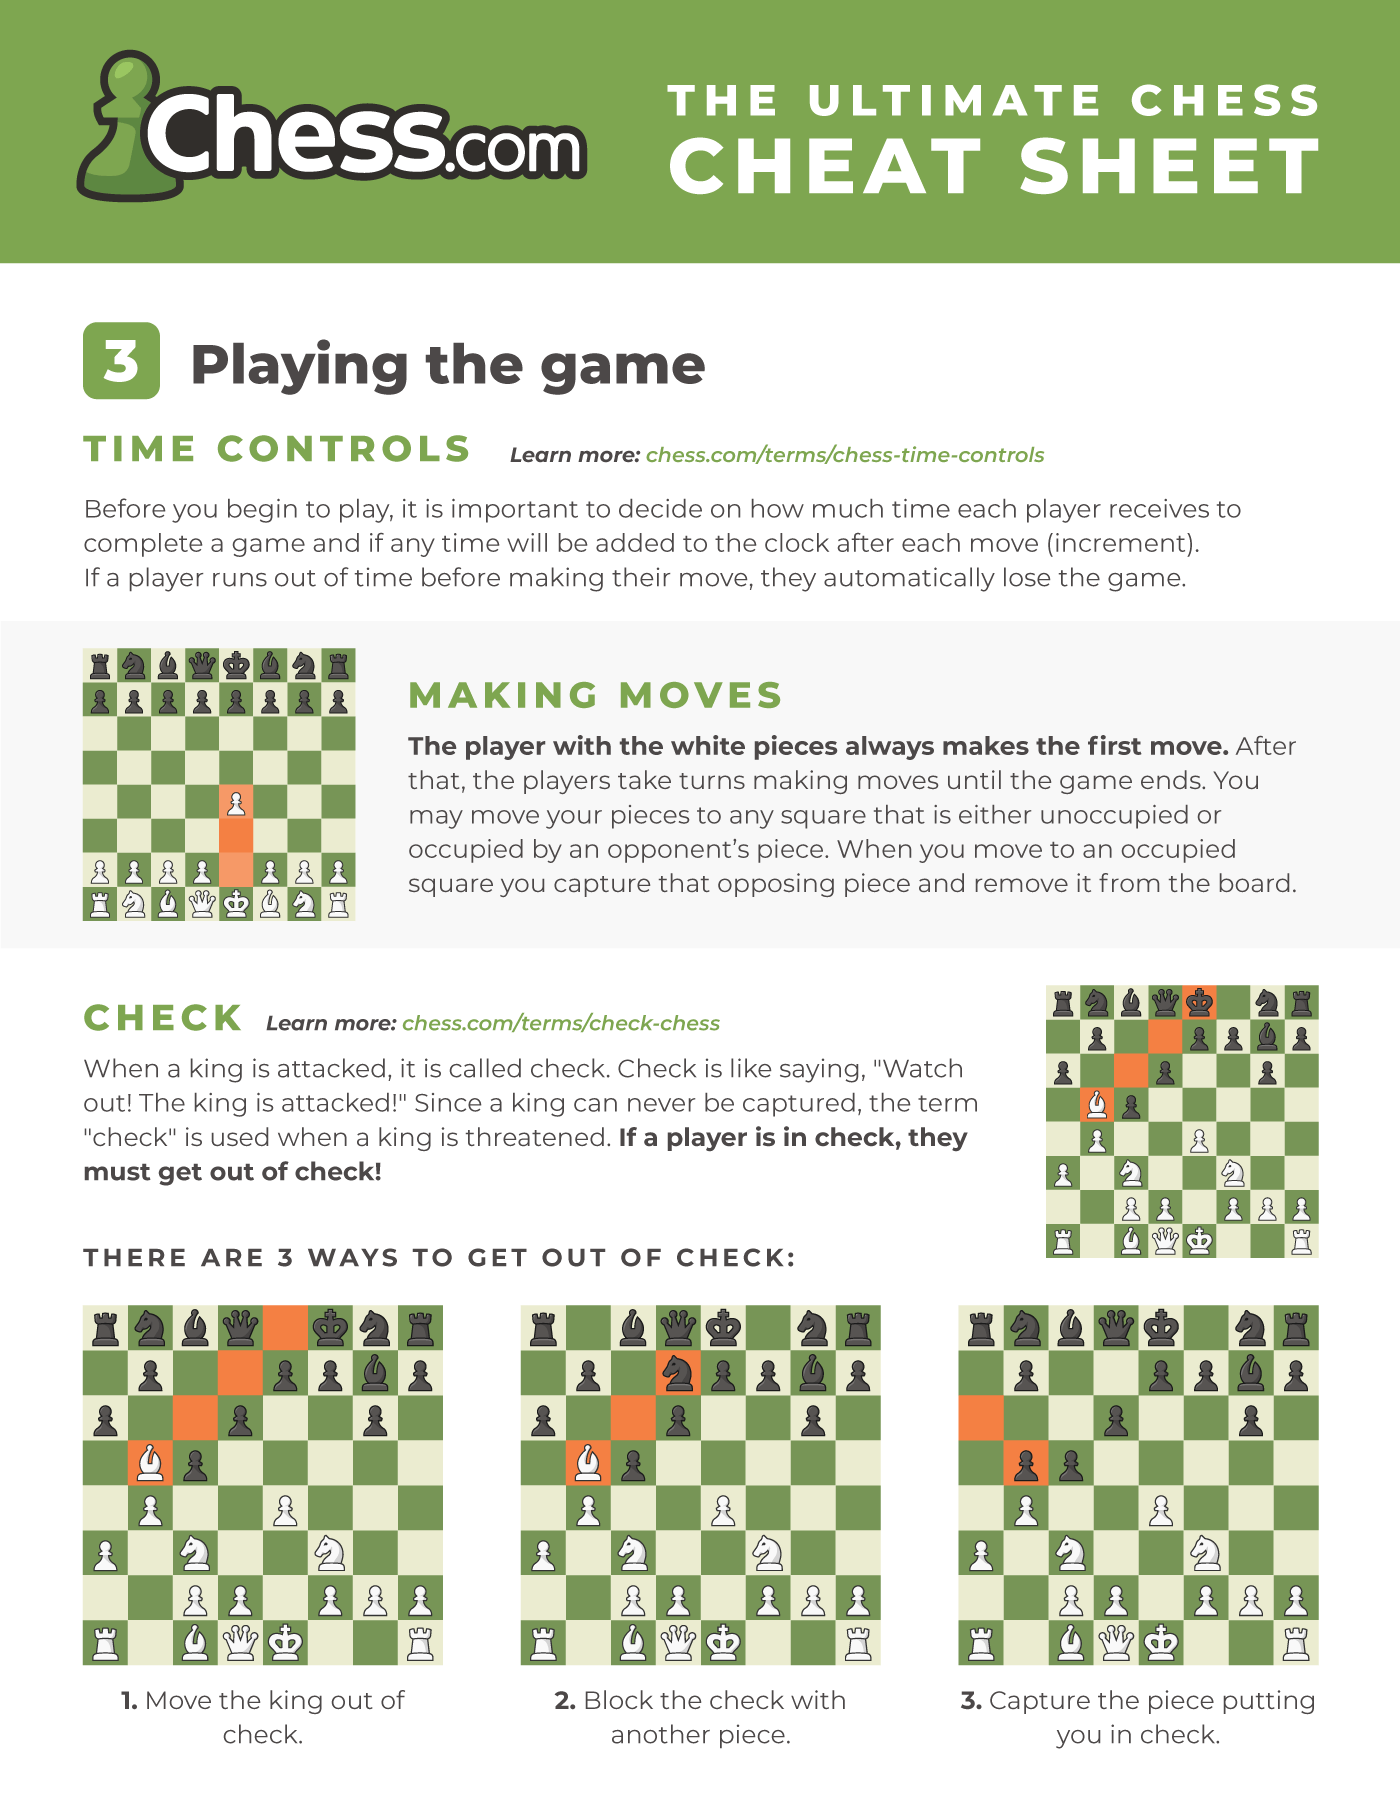 How to Play Chess: Setup, Rules, & Gameplay